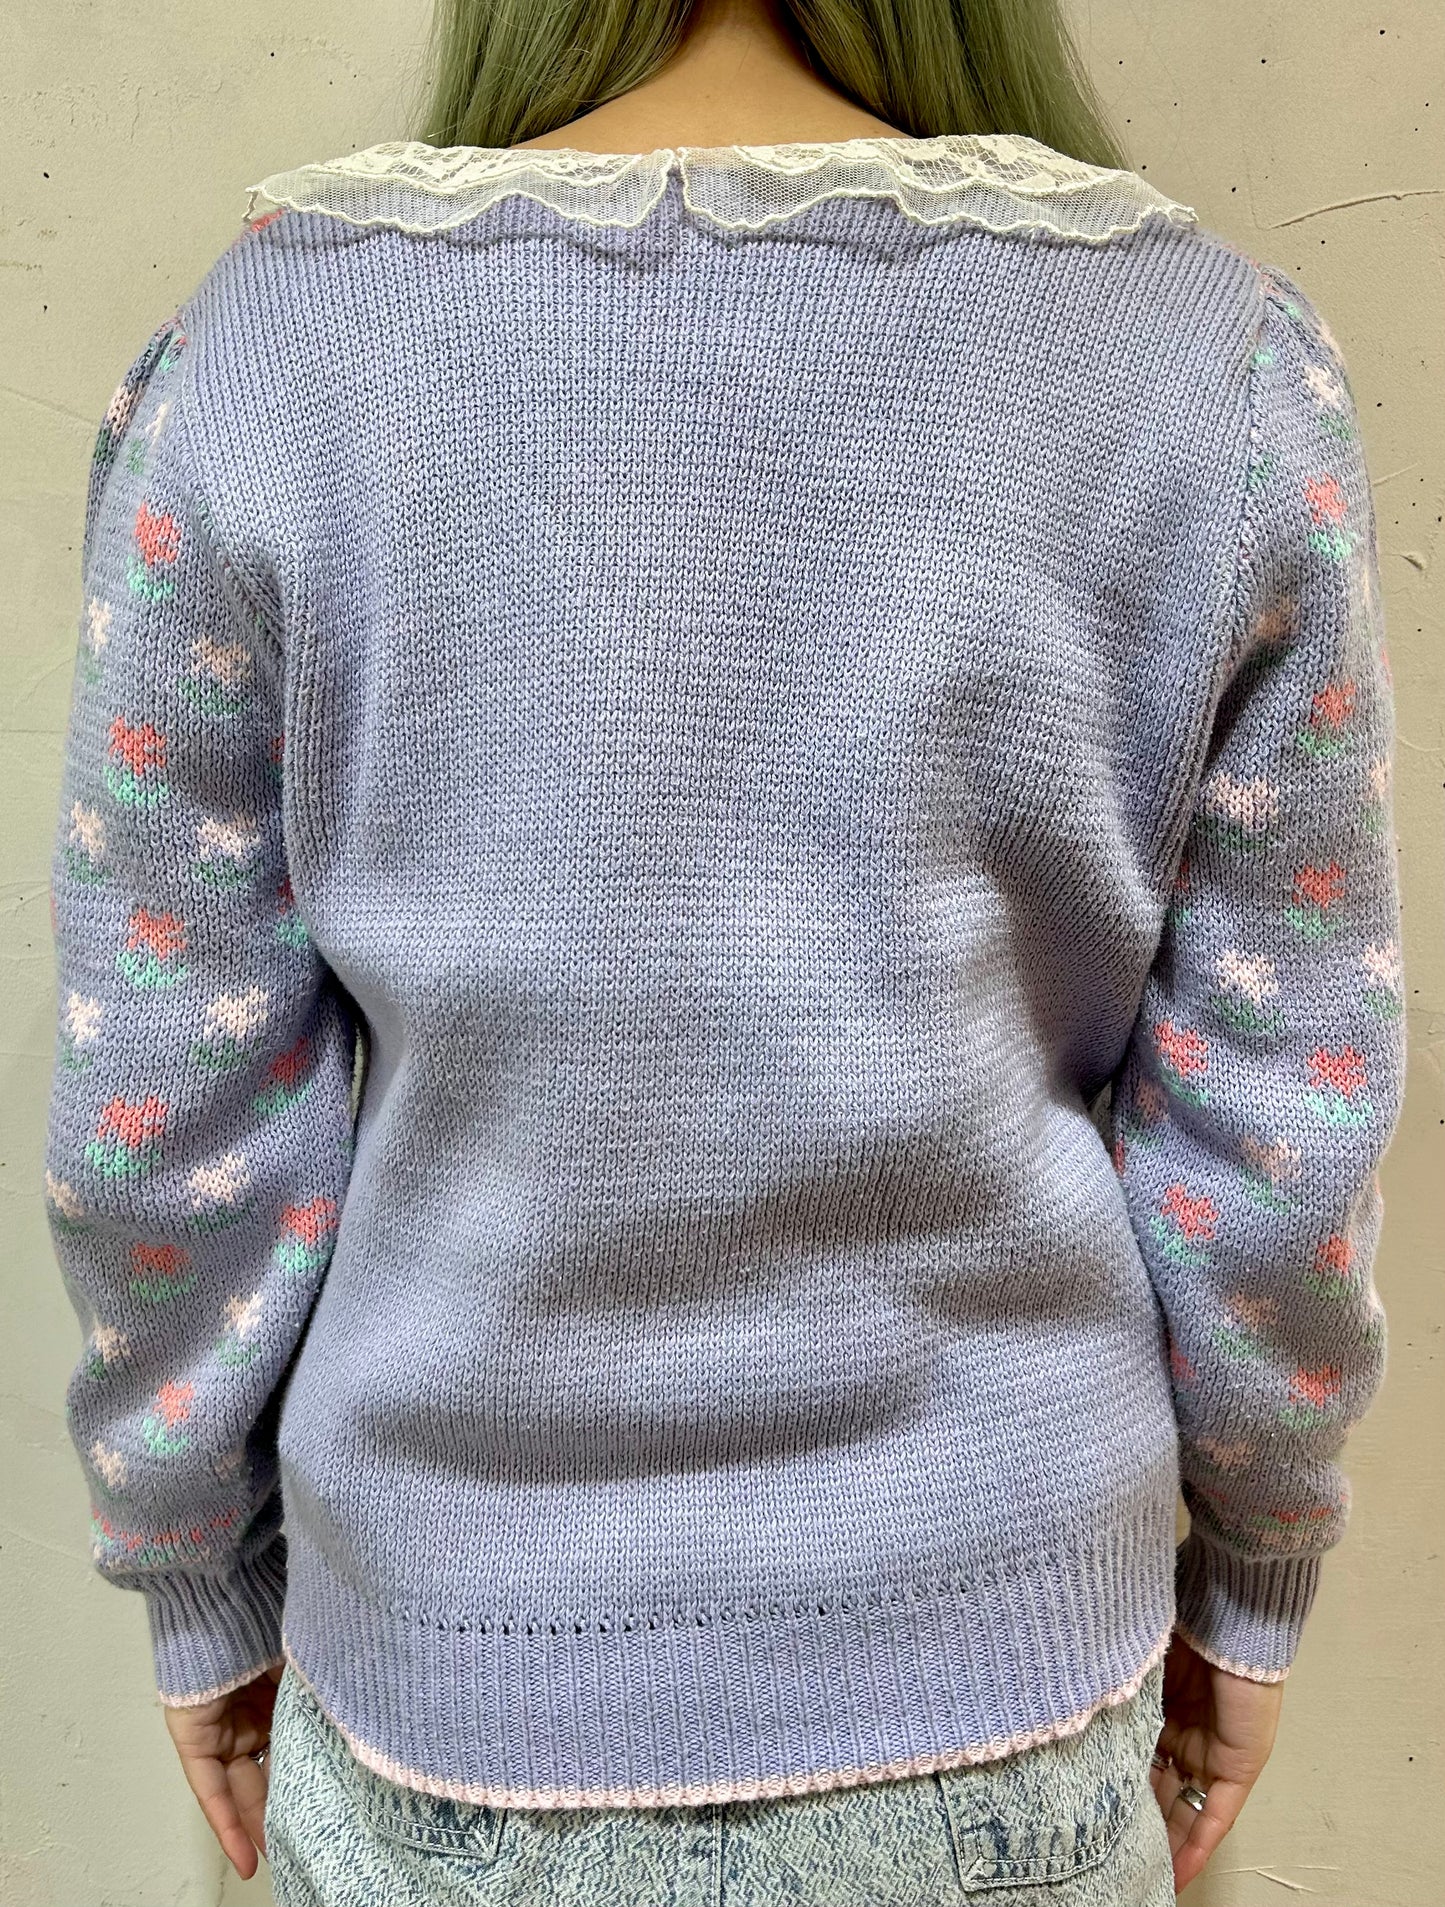 Vintage Cotton Knit Sweater MADE IN USA [B26137]